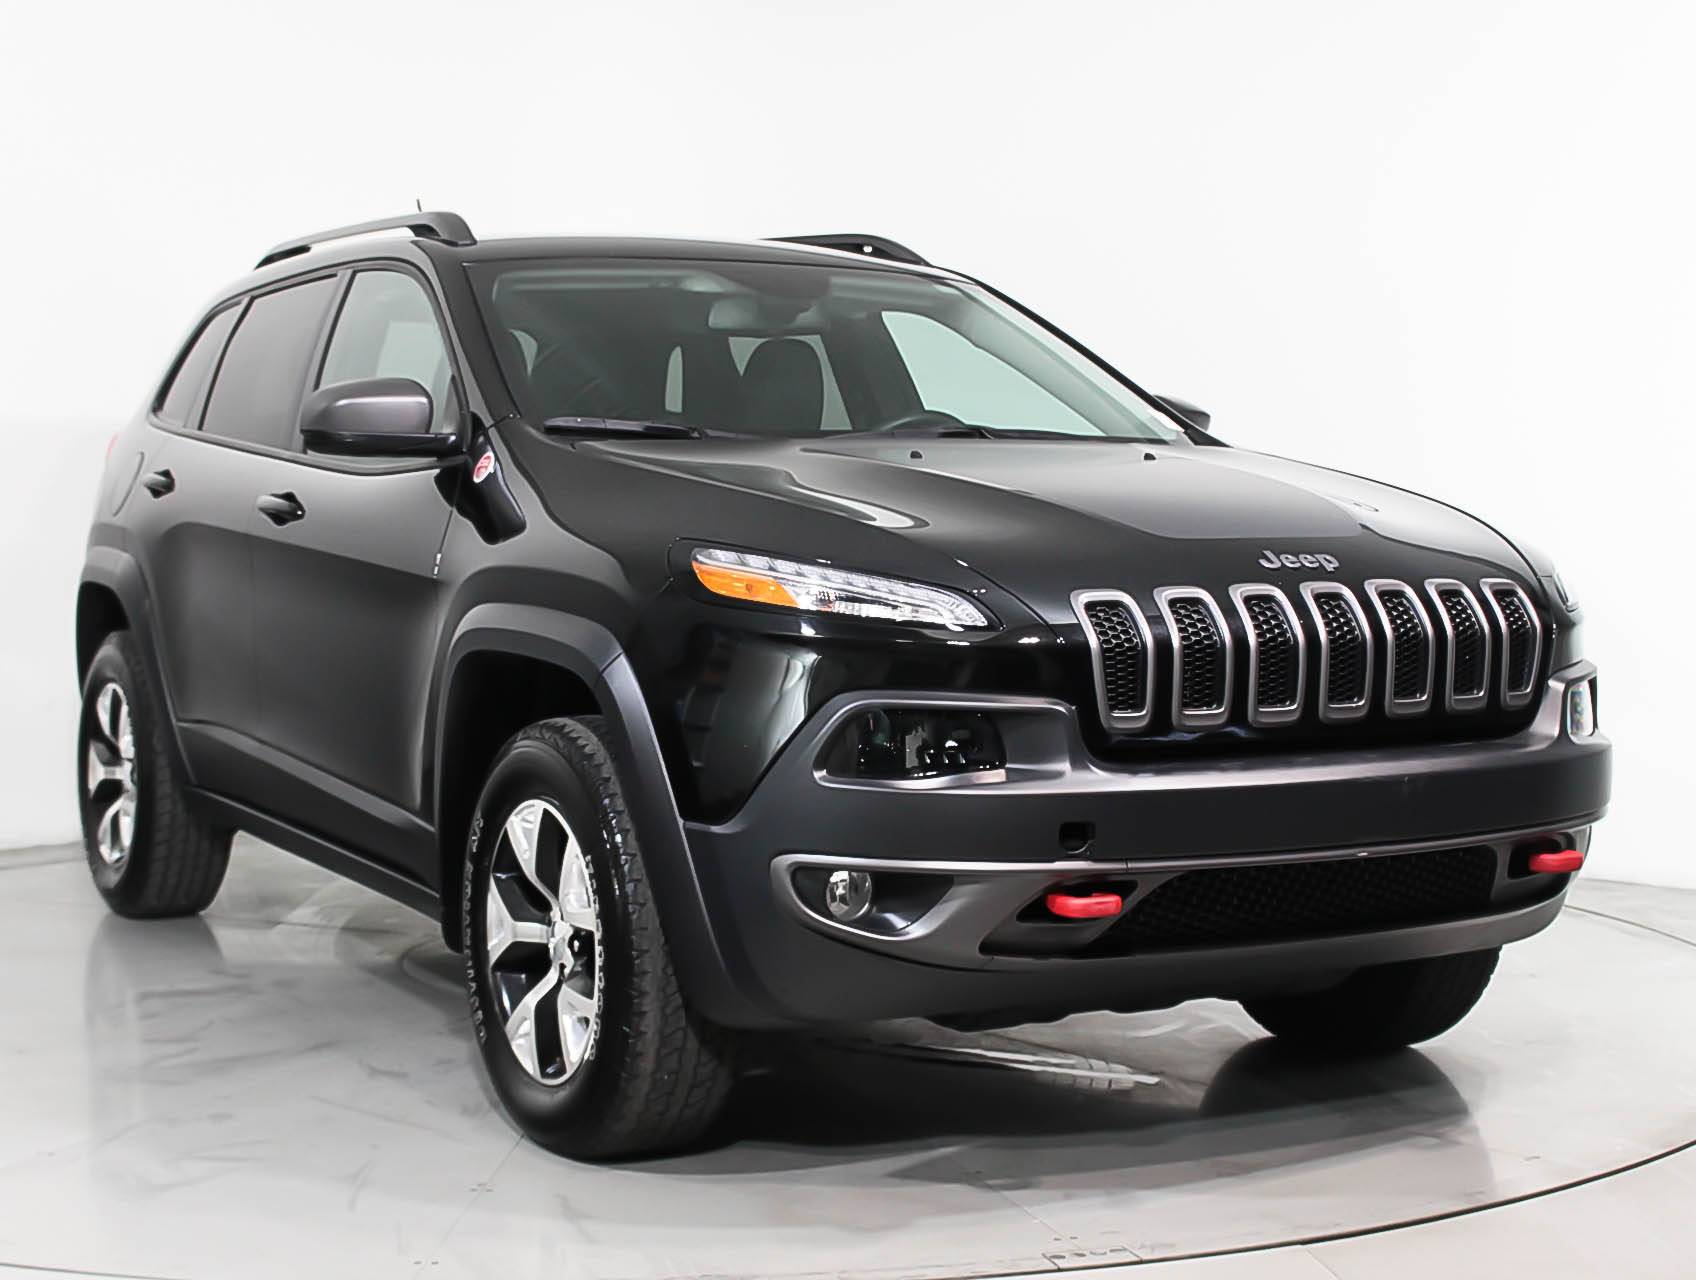 Florida Fine Cars - Used JEEP CHEROKEE 2015 HOLLYWOOD Trailhawk 4x4